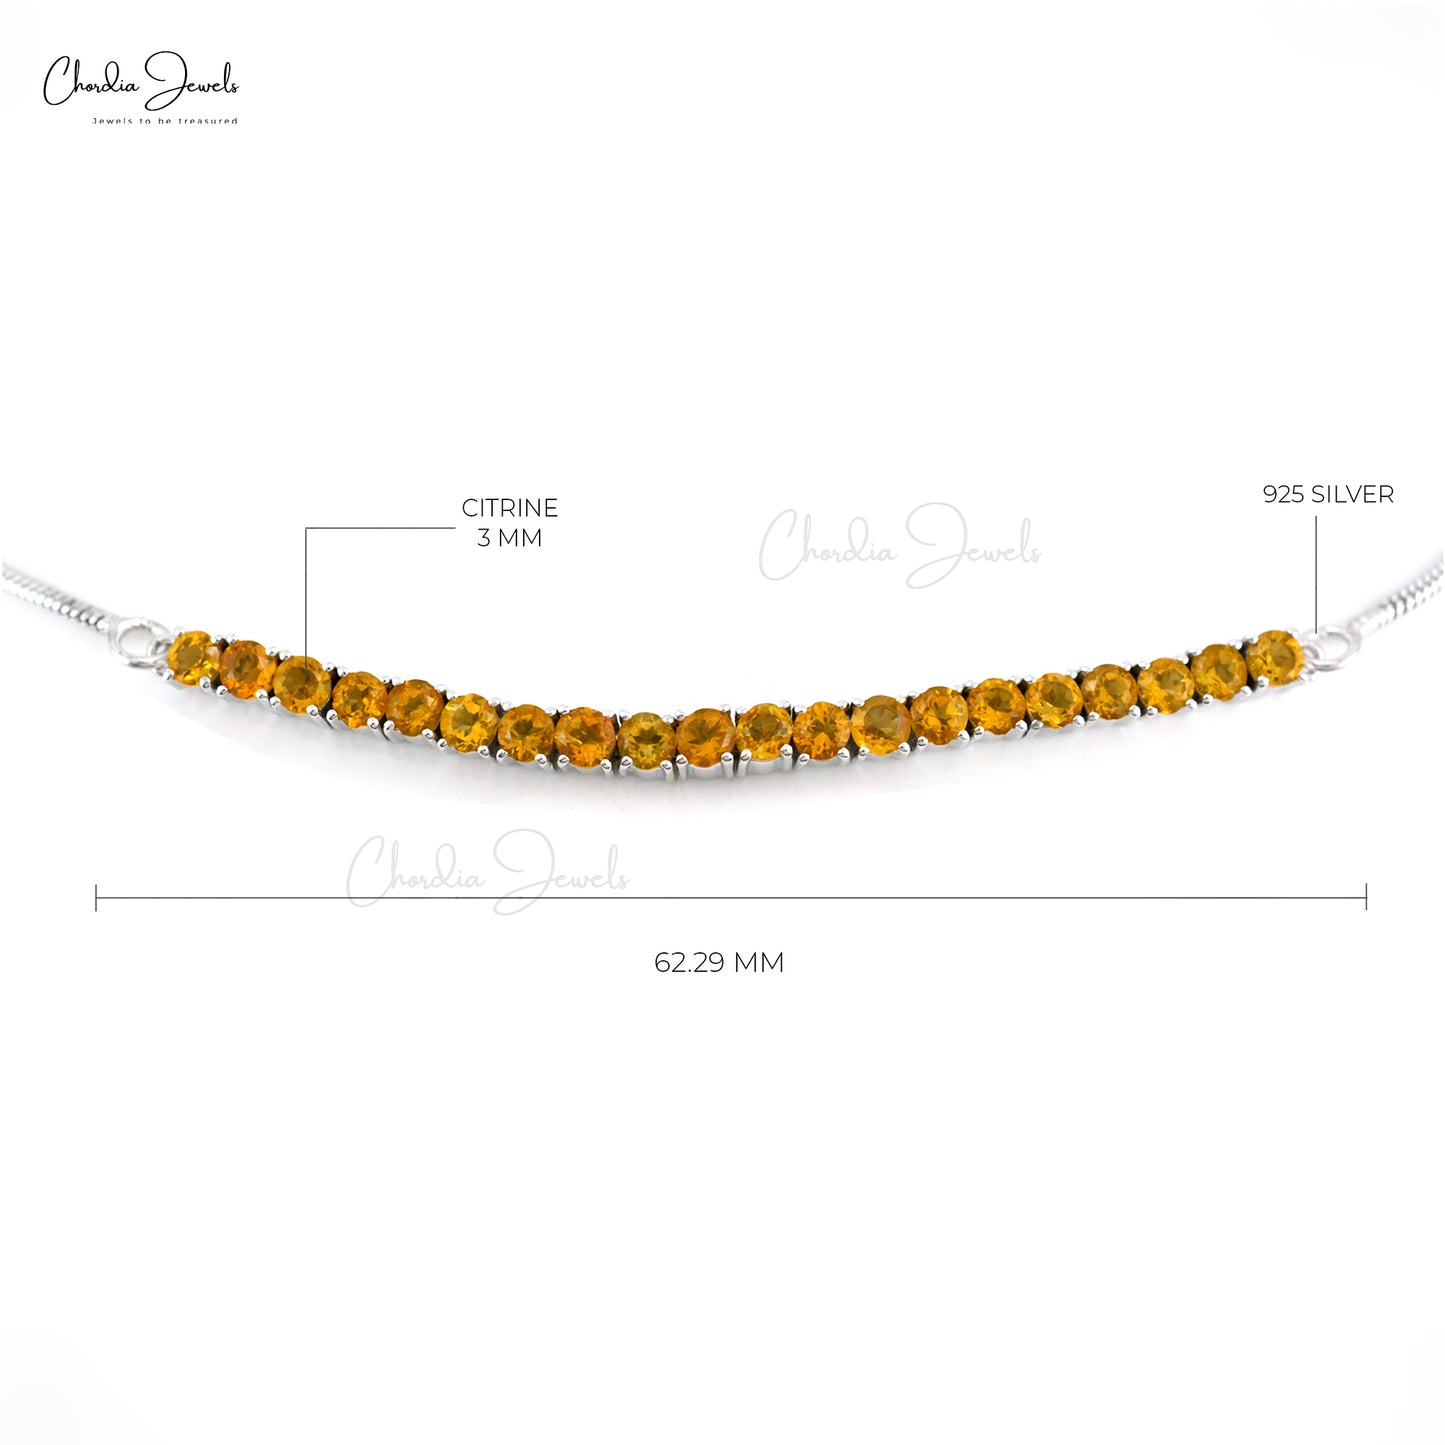 100% Natural Citrine Bracelet 925 Sterling Silver Tennis Jewelry Prong Set Fashion Jewelry At Wholsale Price